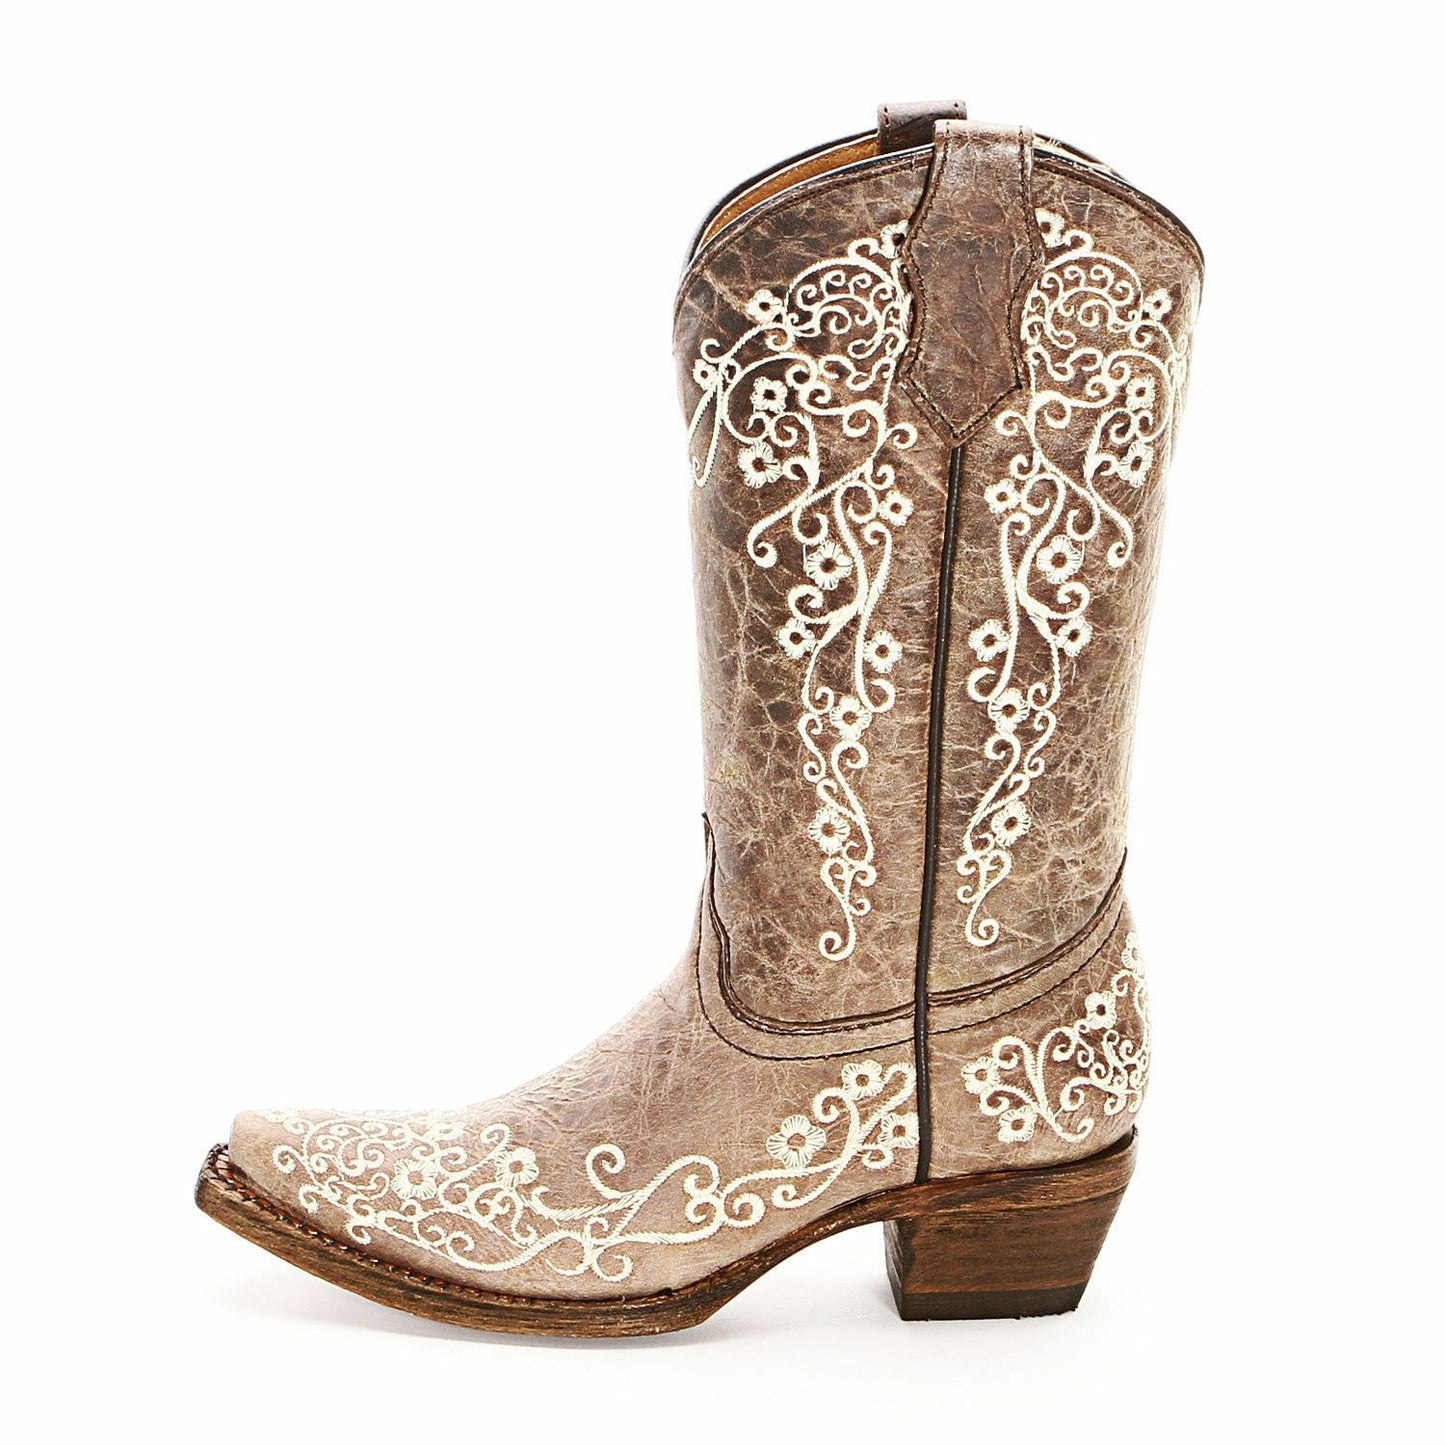 KIDS YOUTH CORRAL COWGIRL BOOTS A2773-FLORAL EMBROIDERED